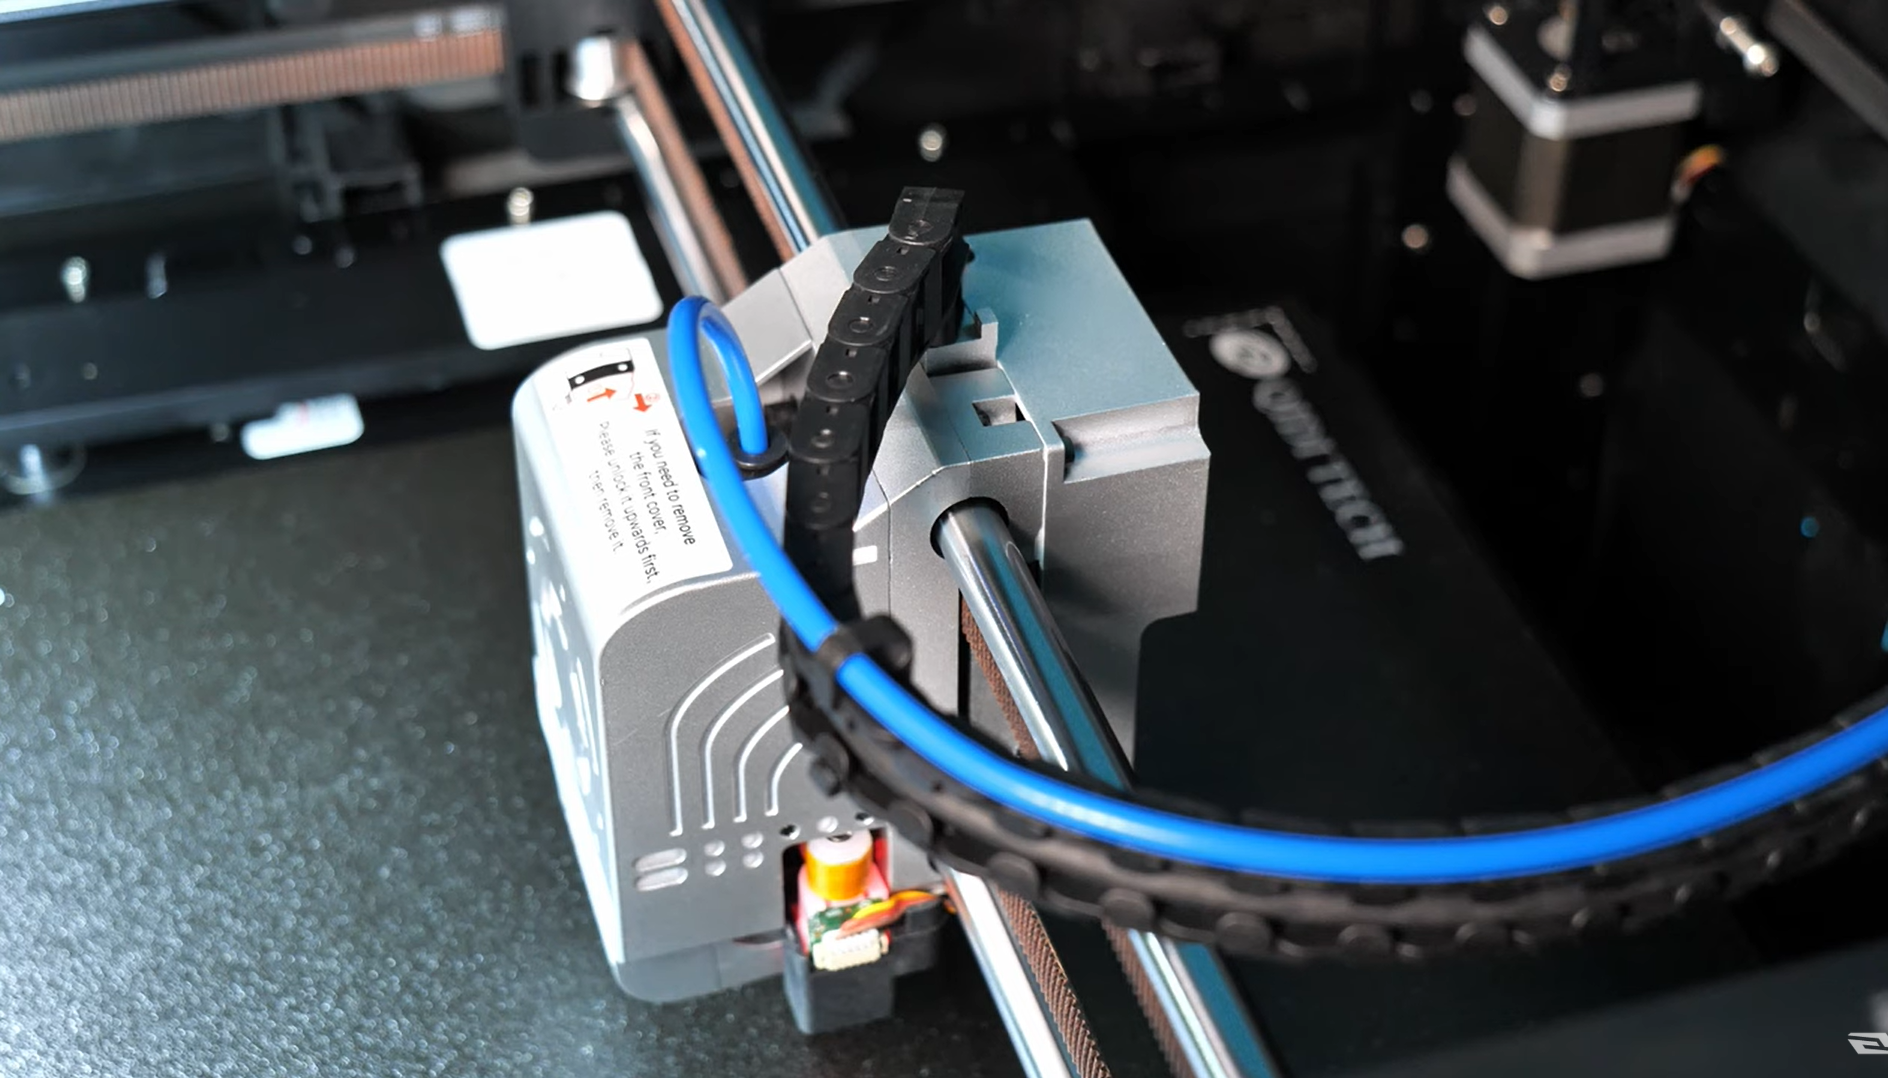 3D Printing Troubleshooting: 15 Most Common Problems & Solutions